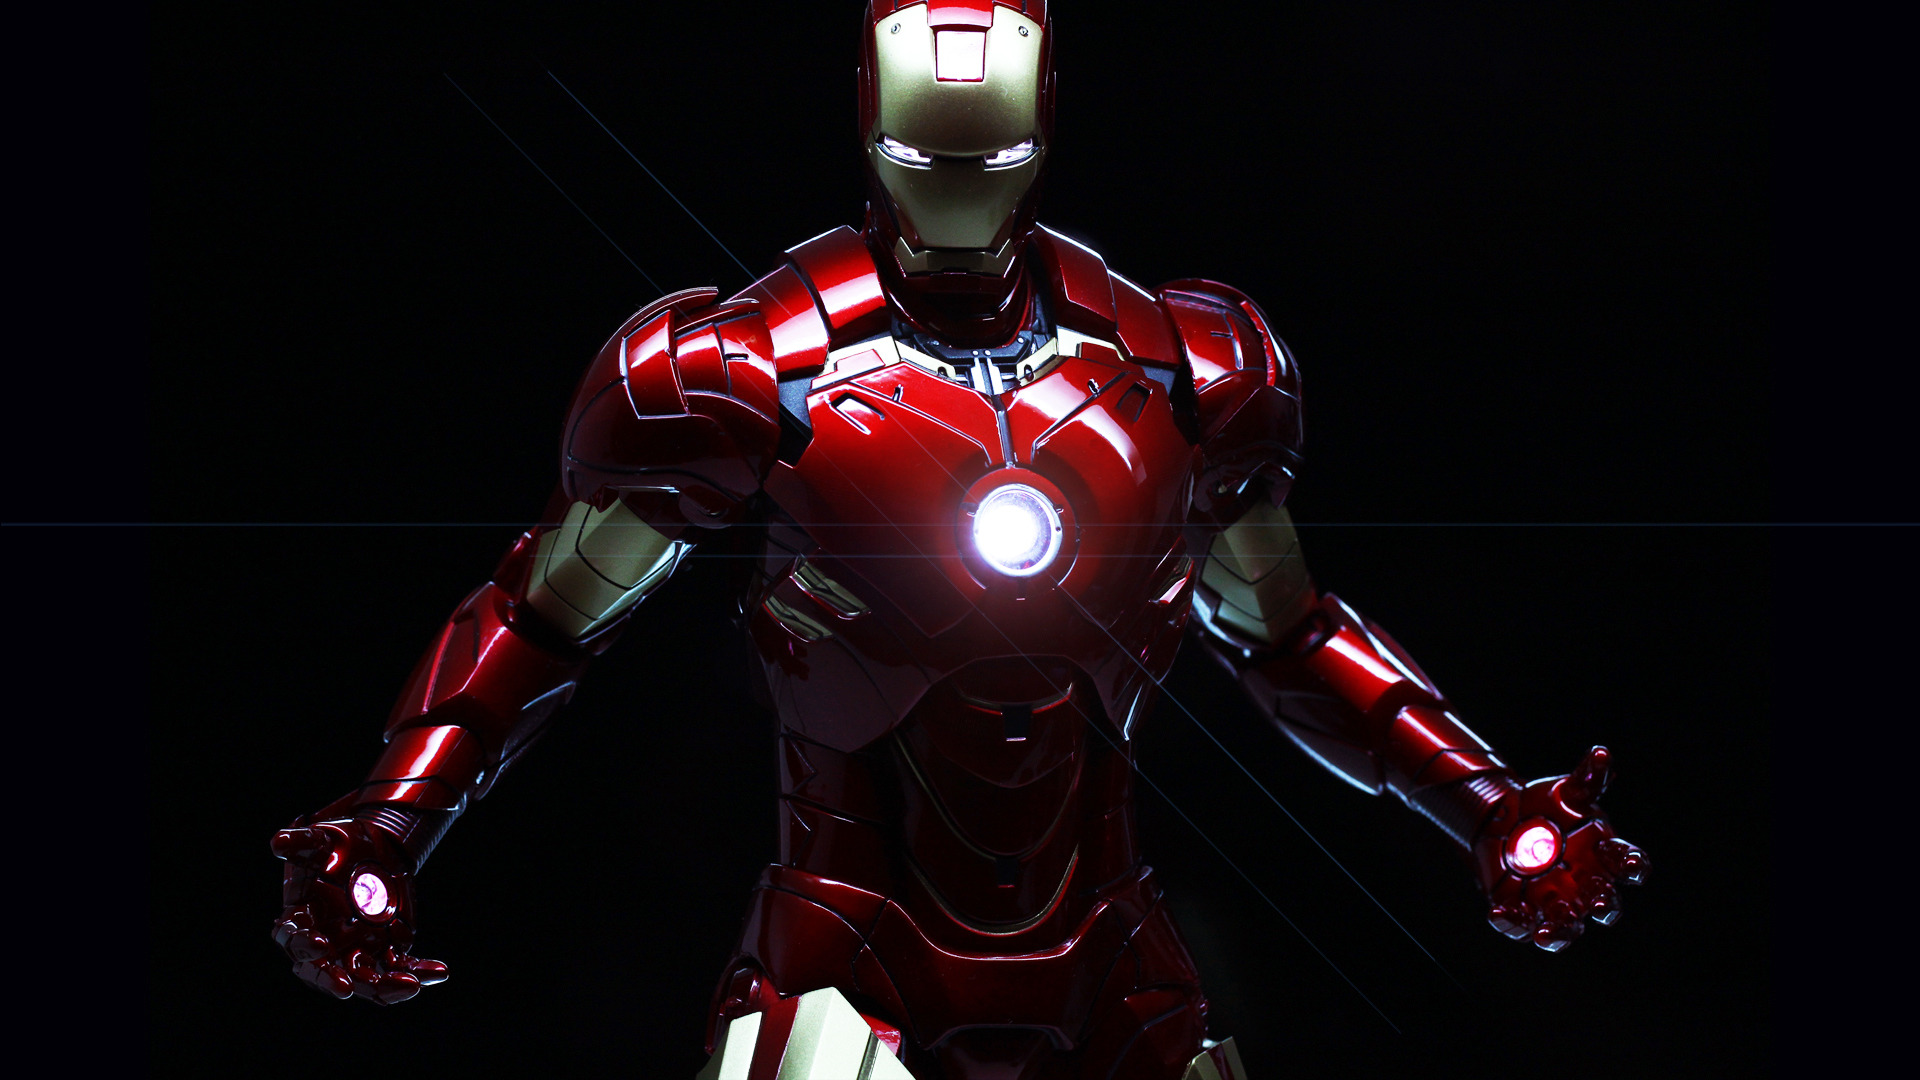 wallpaper details file name iron man wallpaper hd uploaded by 1920x1080